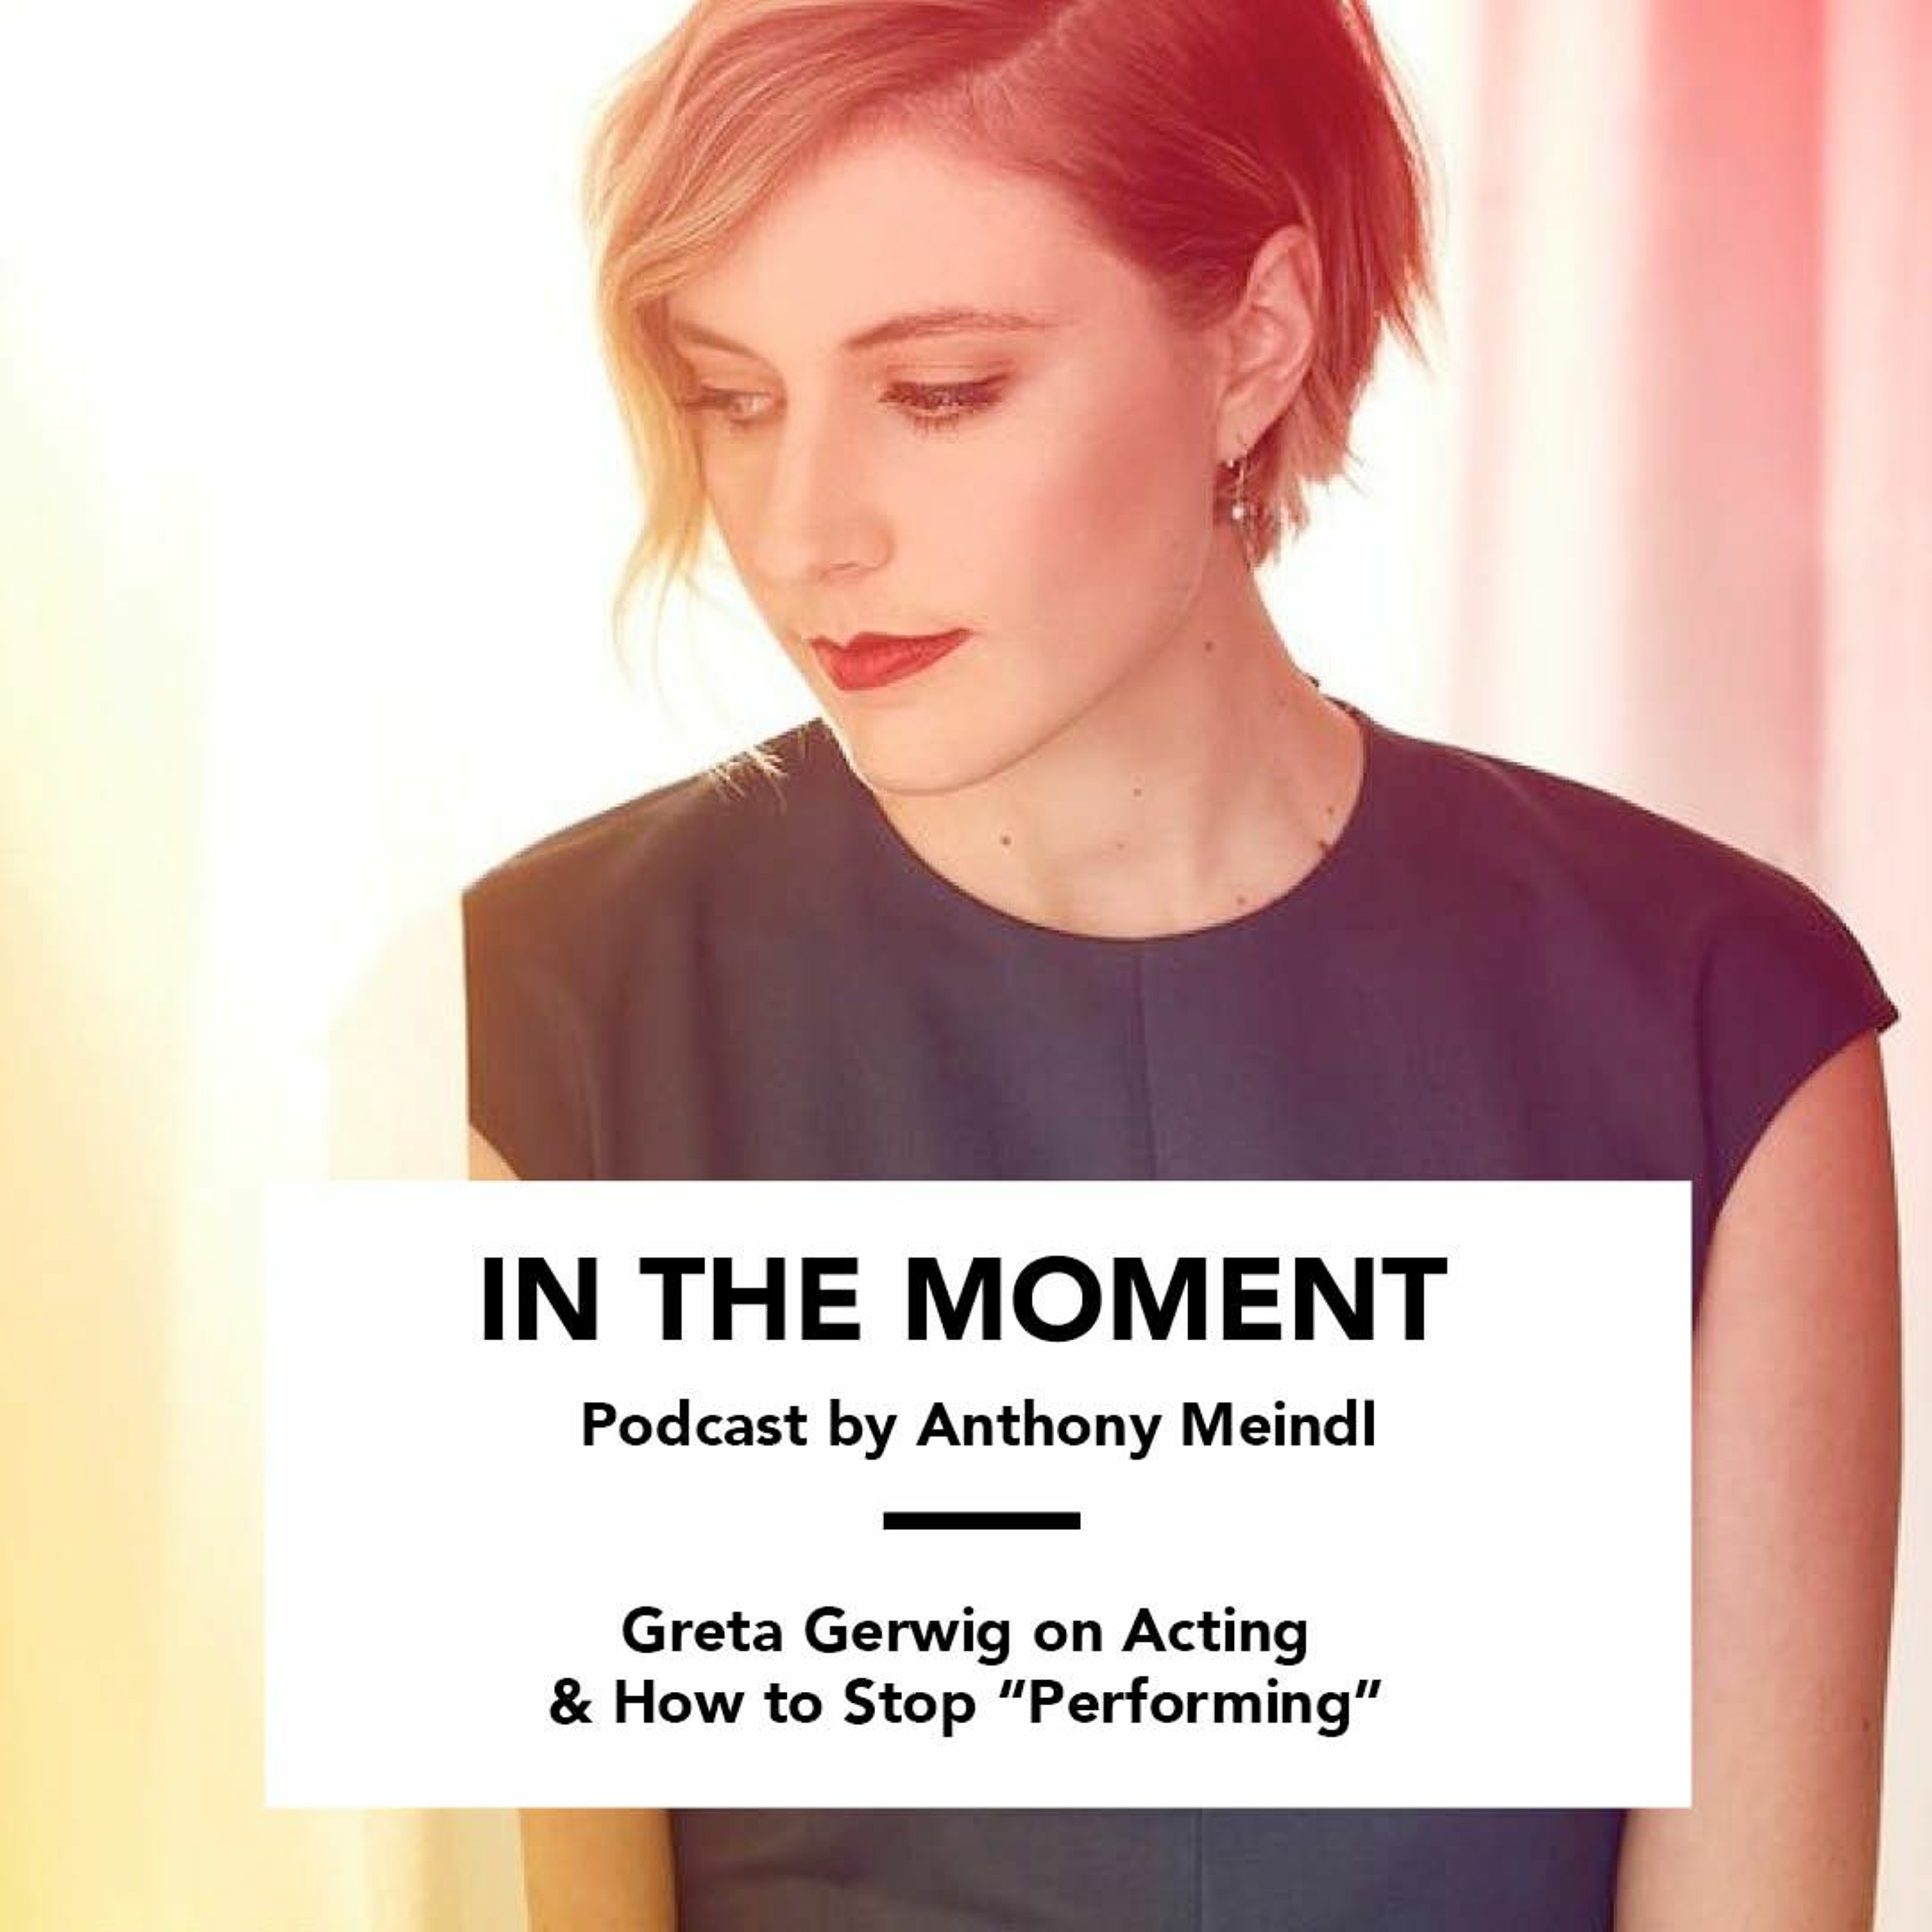 Greta Gerwig on Acting & How to Stop 